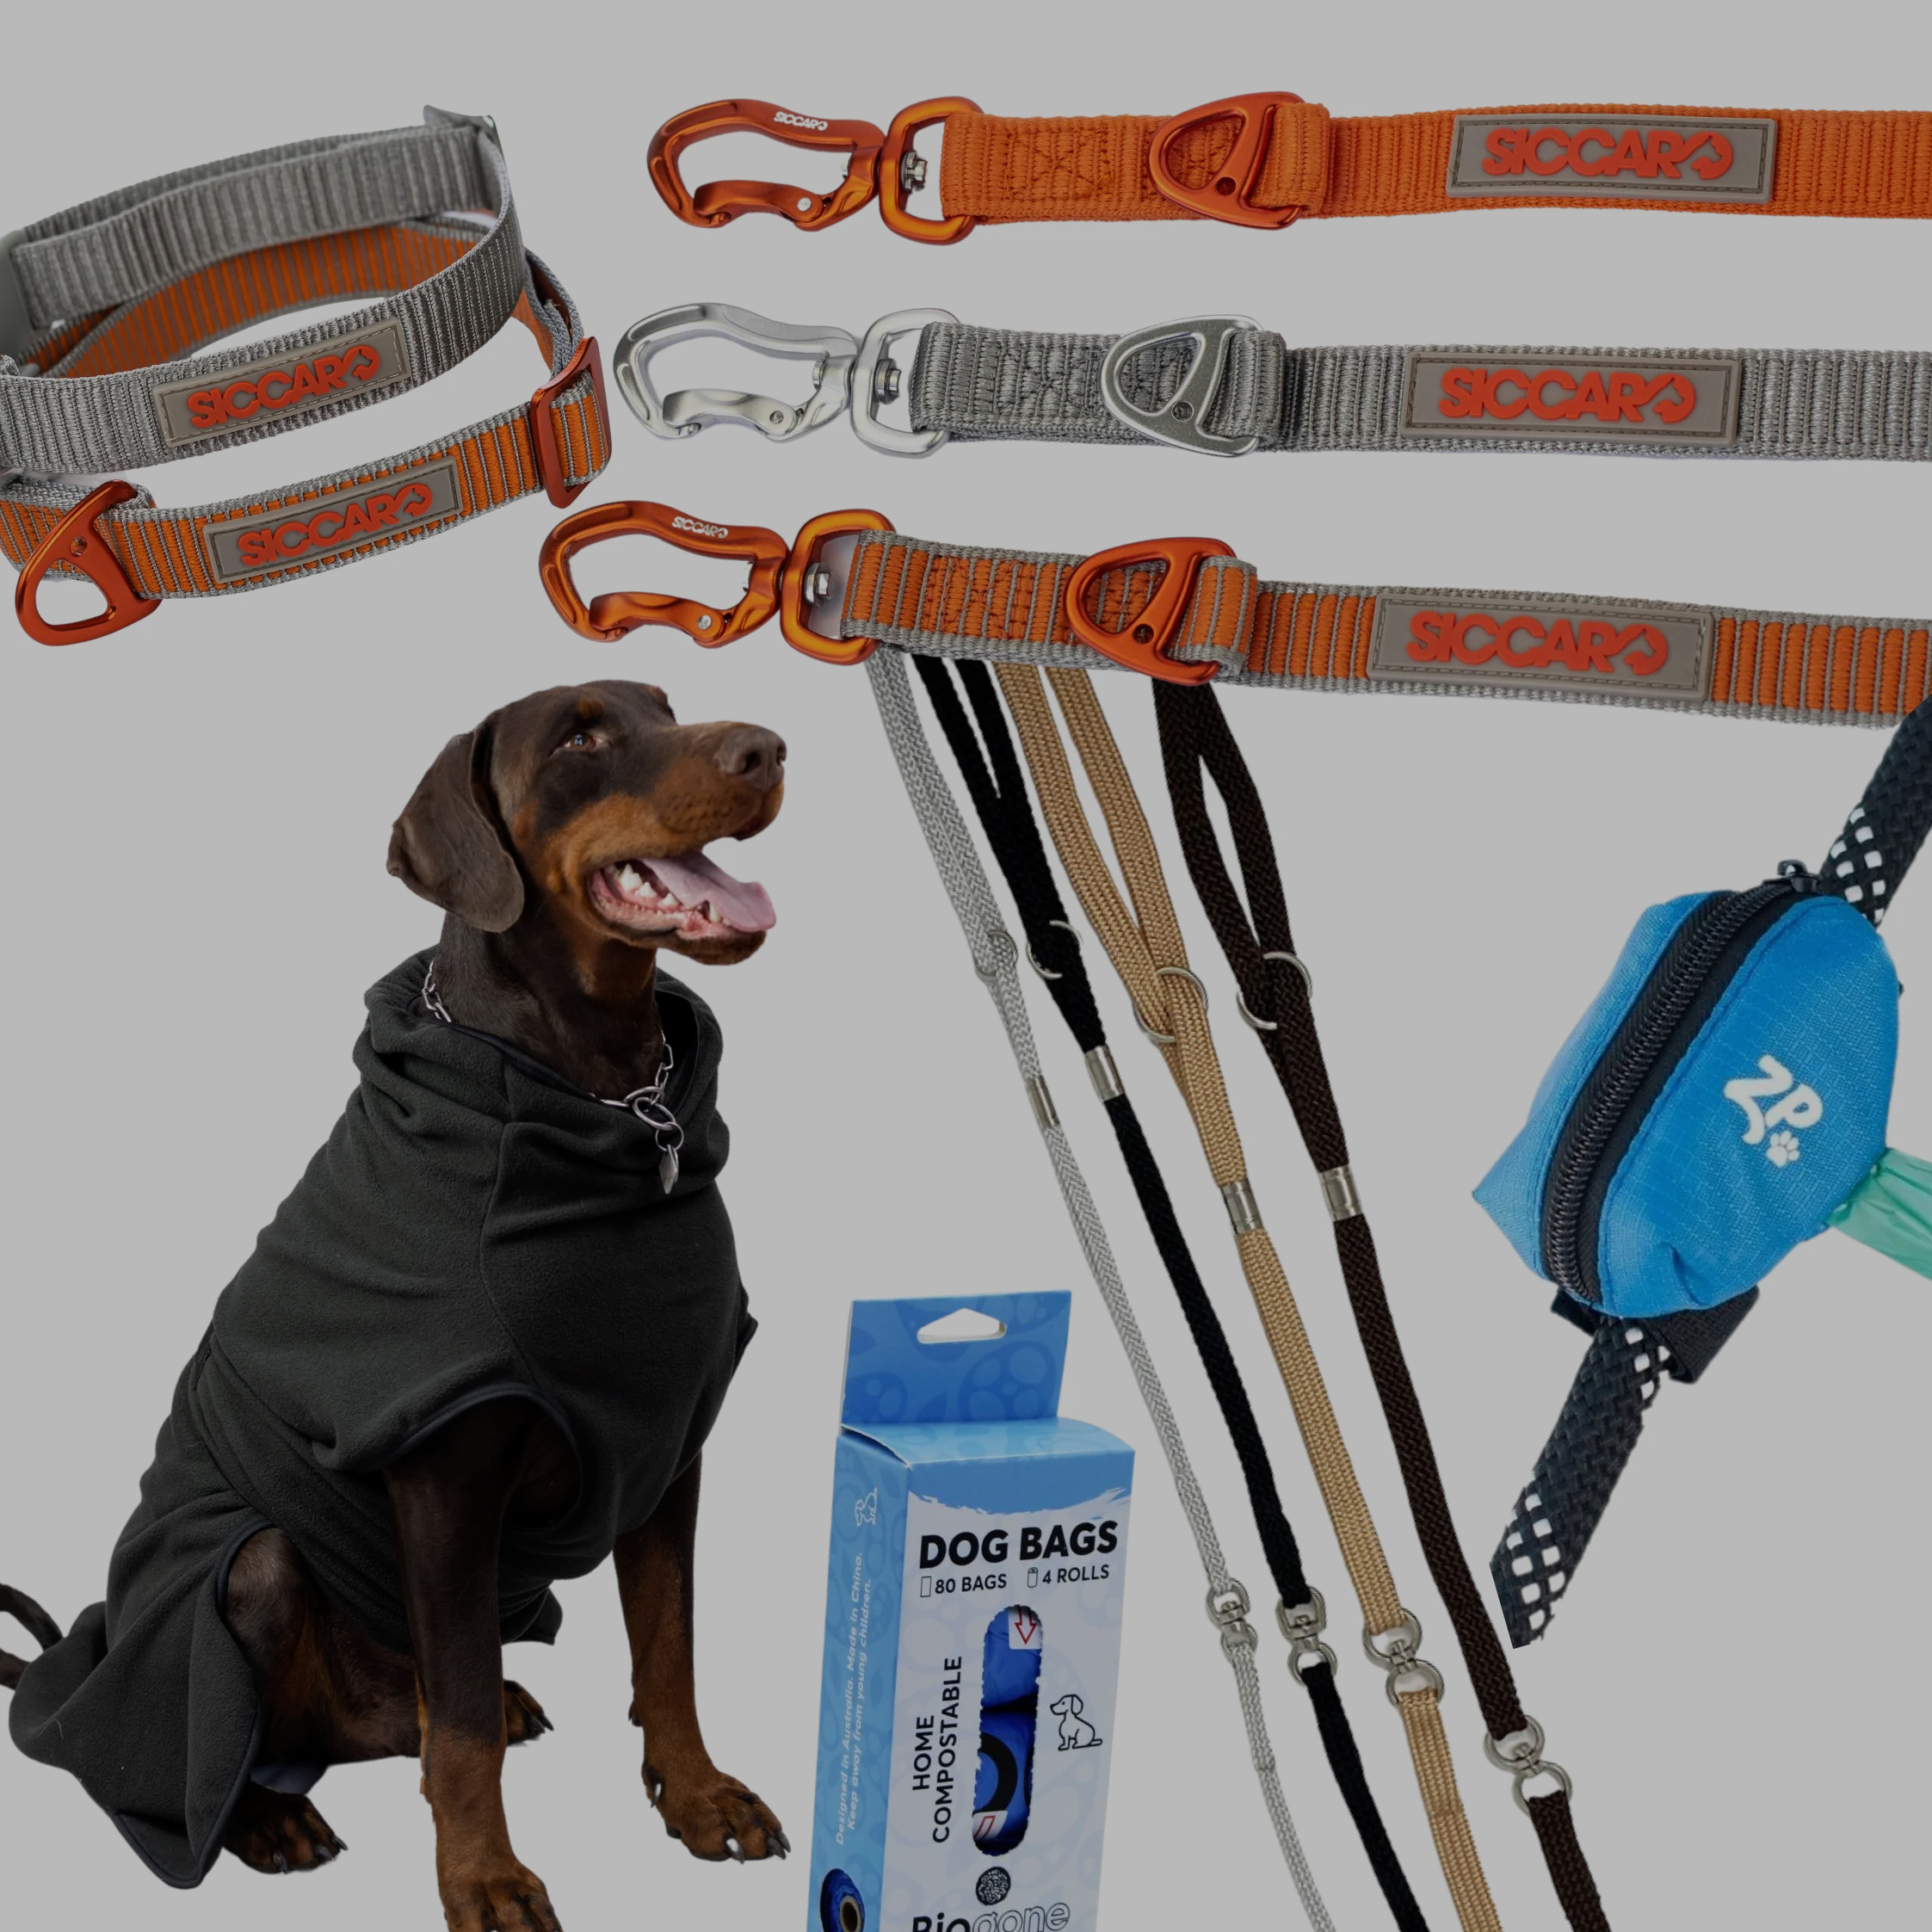 Gear - A collection of Gear such as leads and collars for your pets.